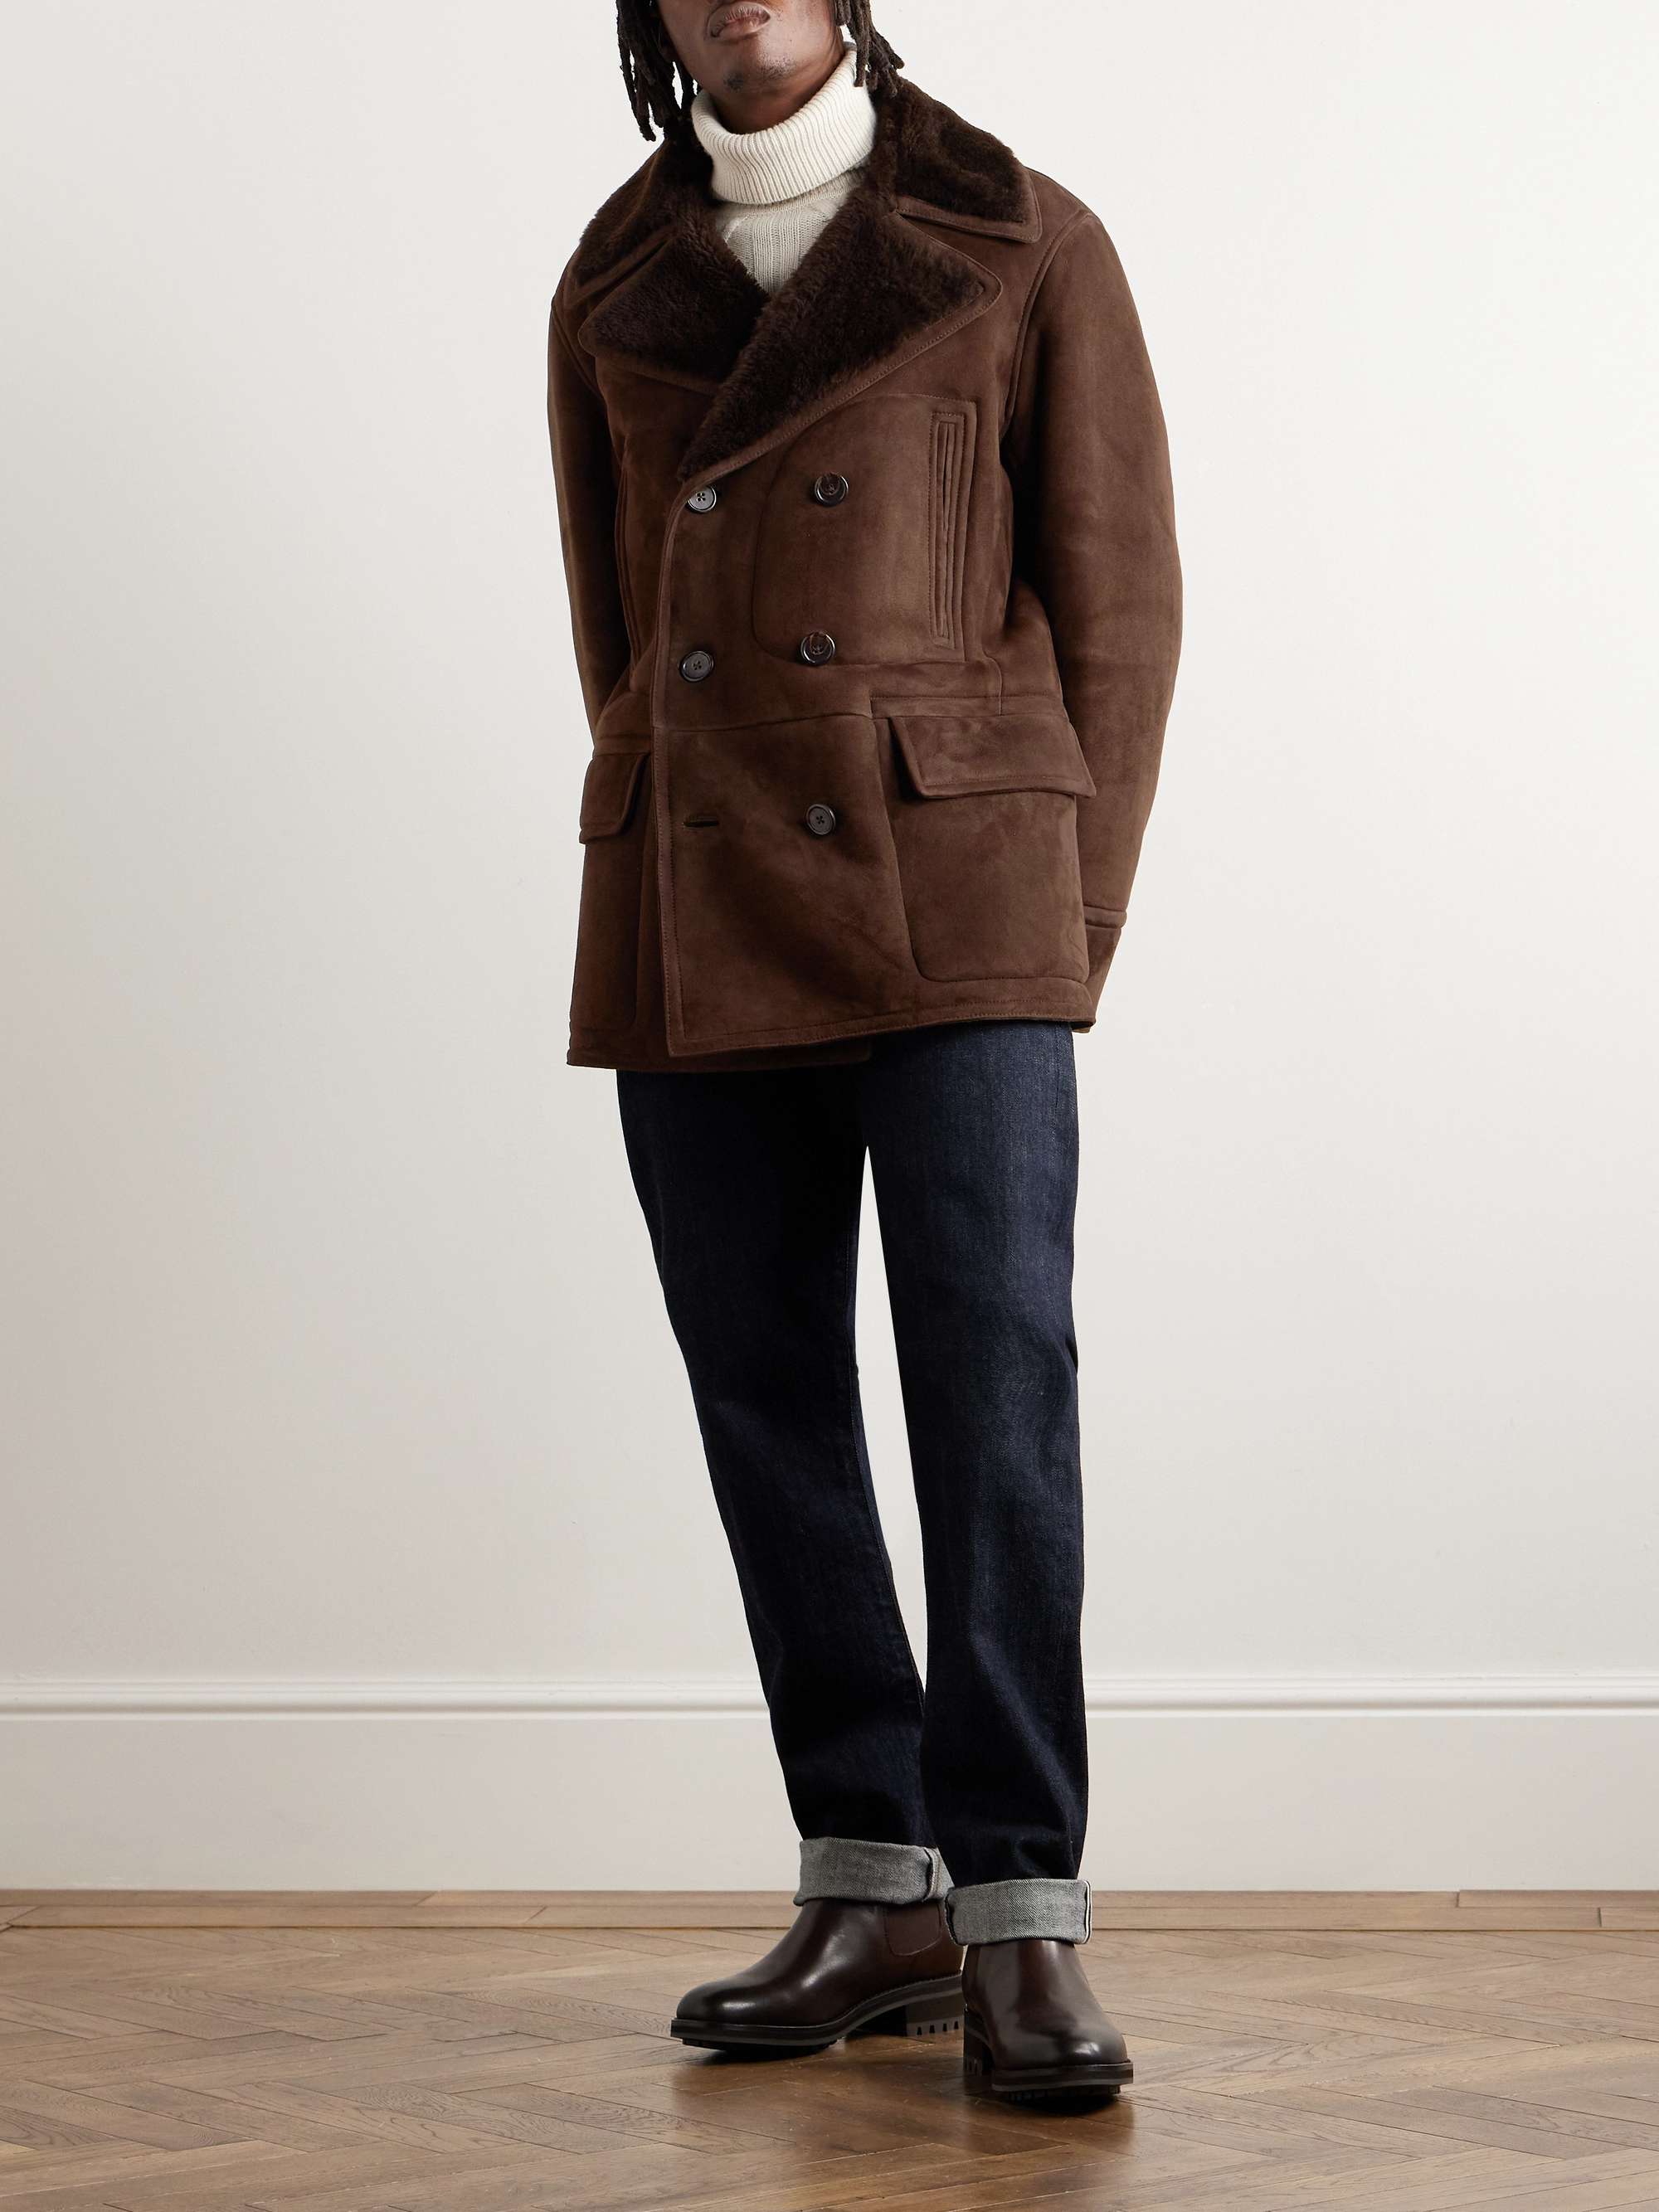 The Polo Double-Breasted Shearling Coat